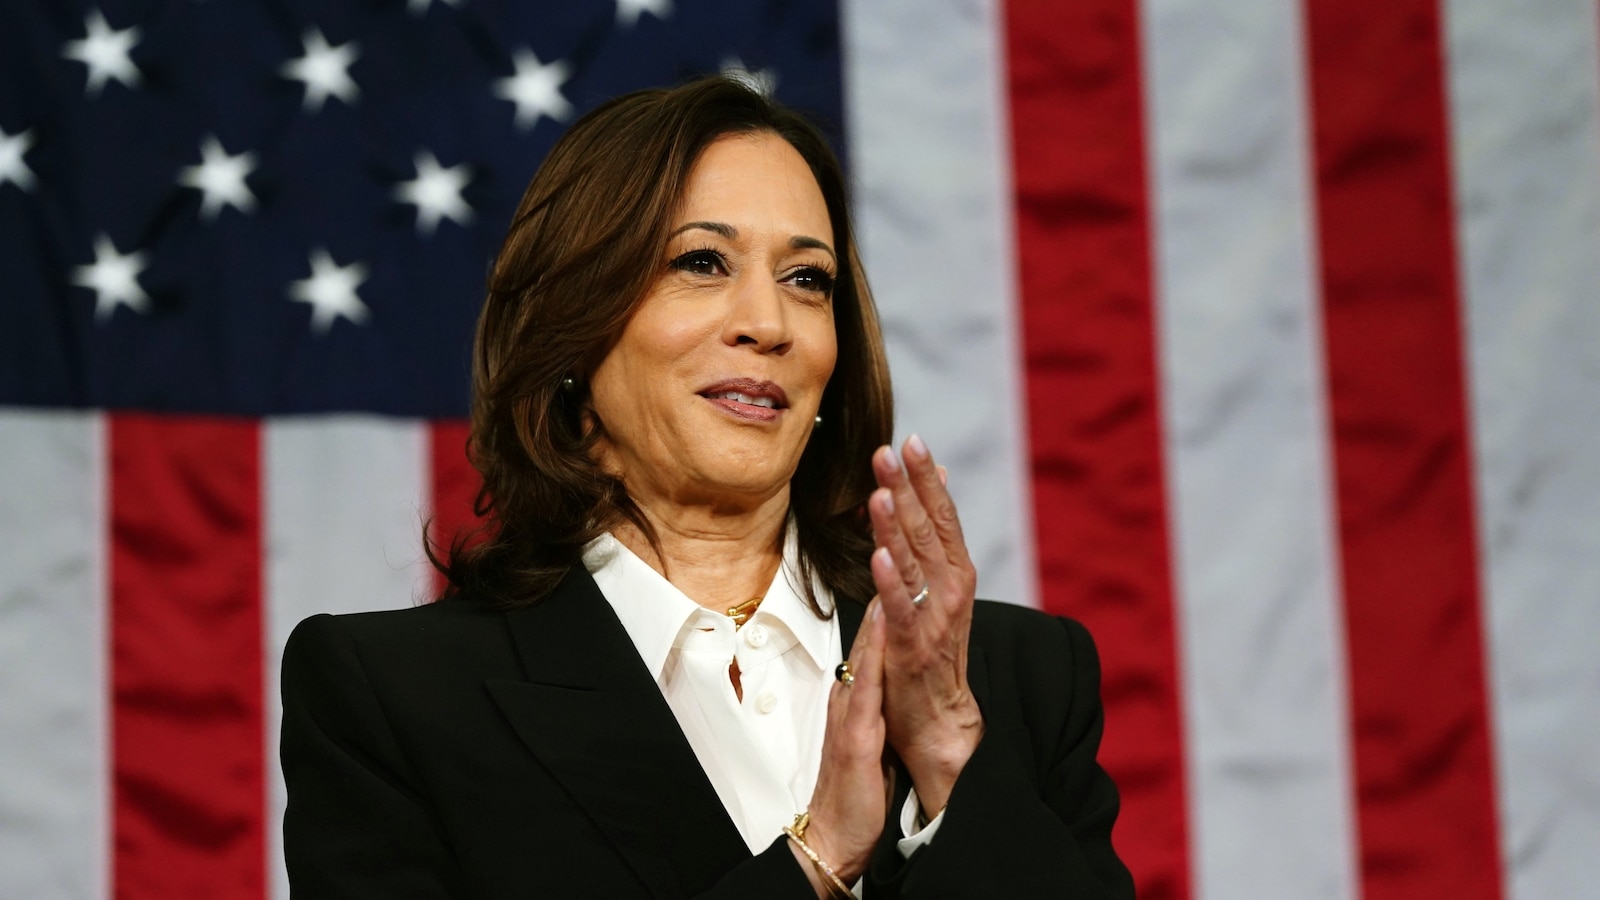 Harris noncommittal on whether Biden will debate Trump: 'ready' to serve if necessary